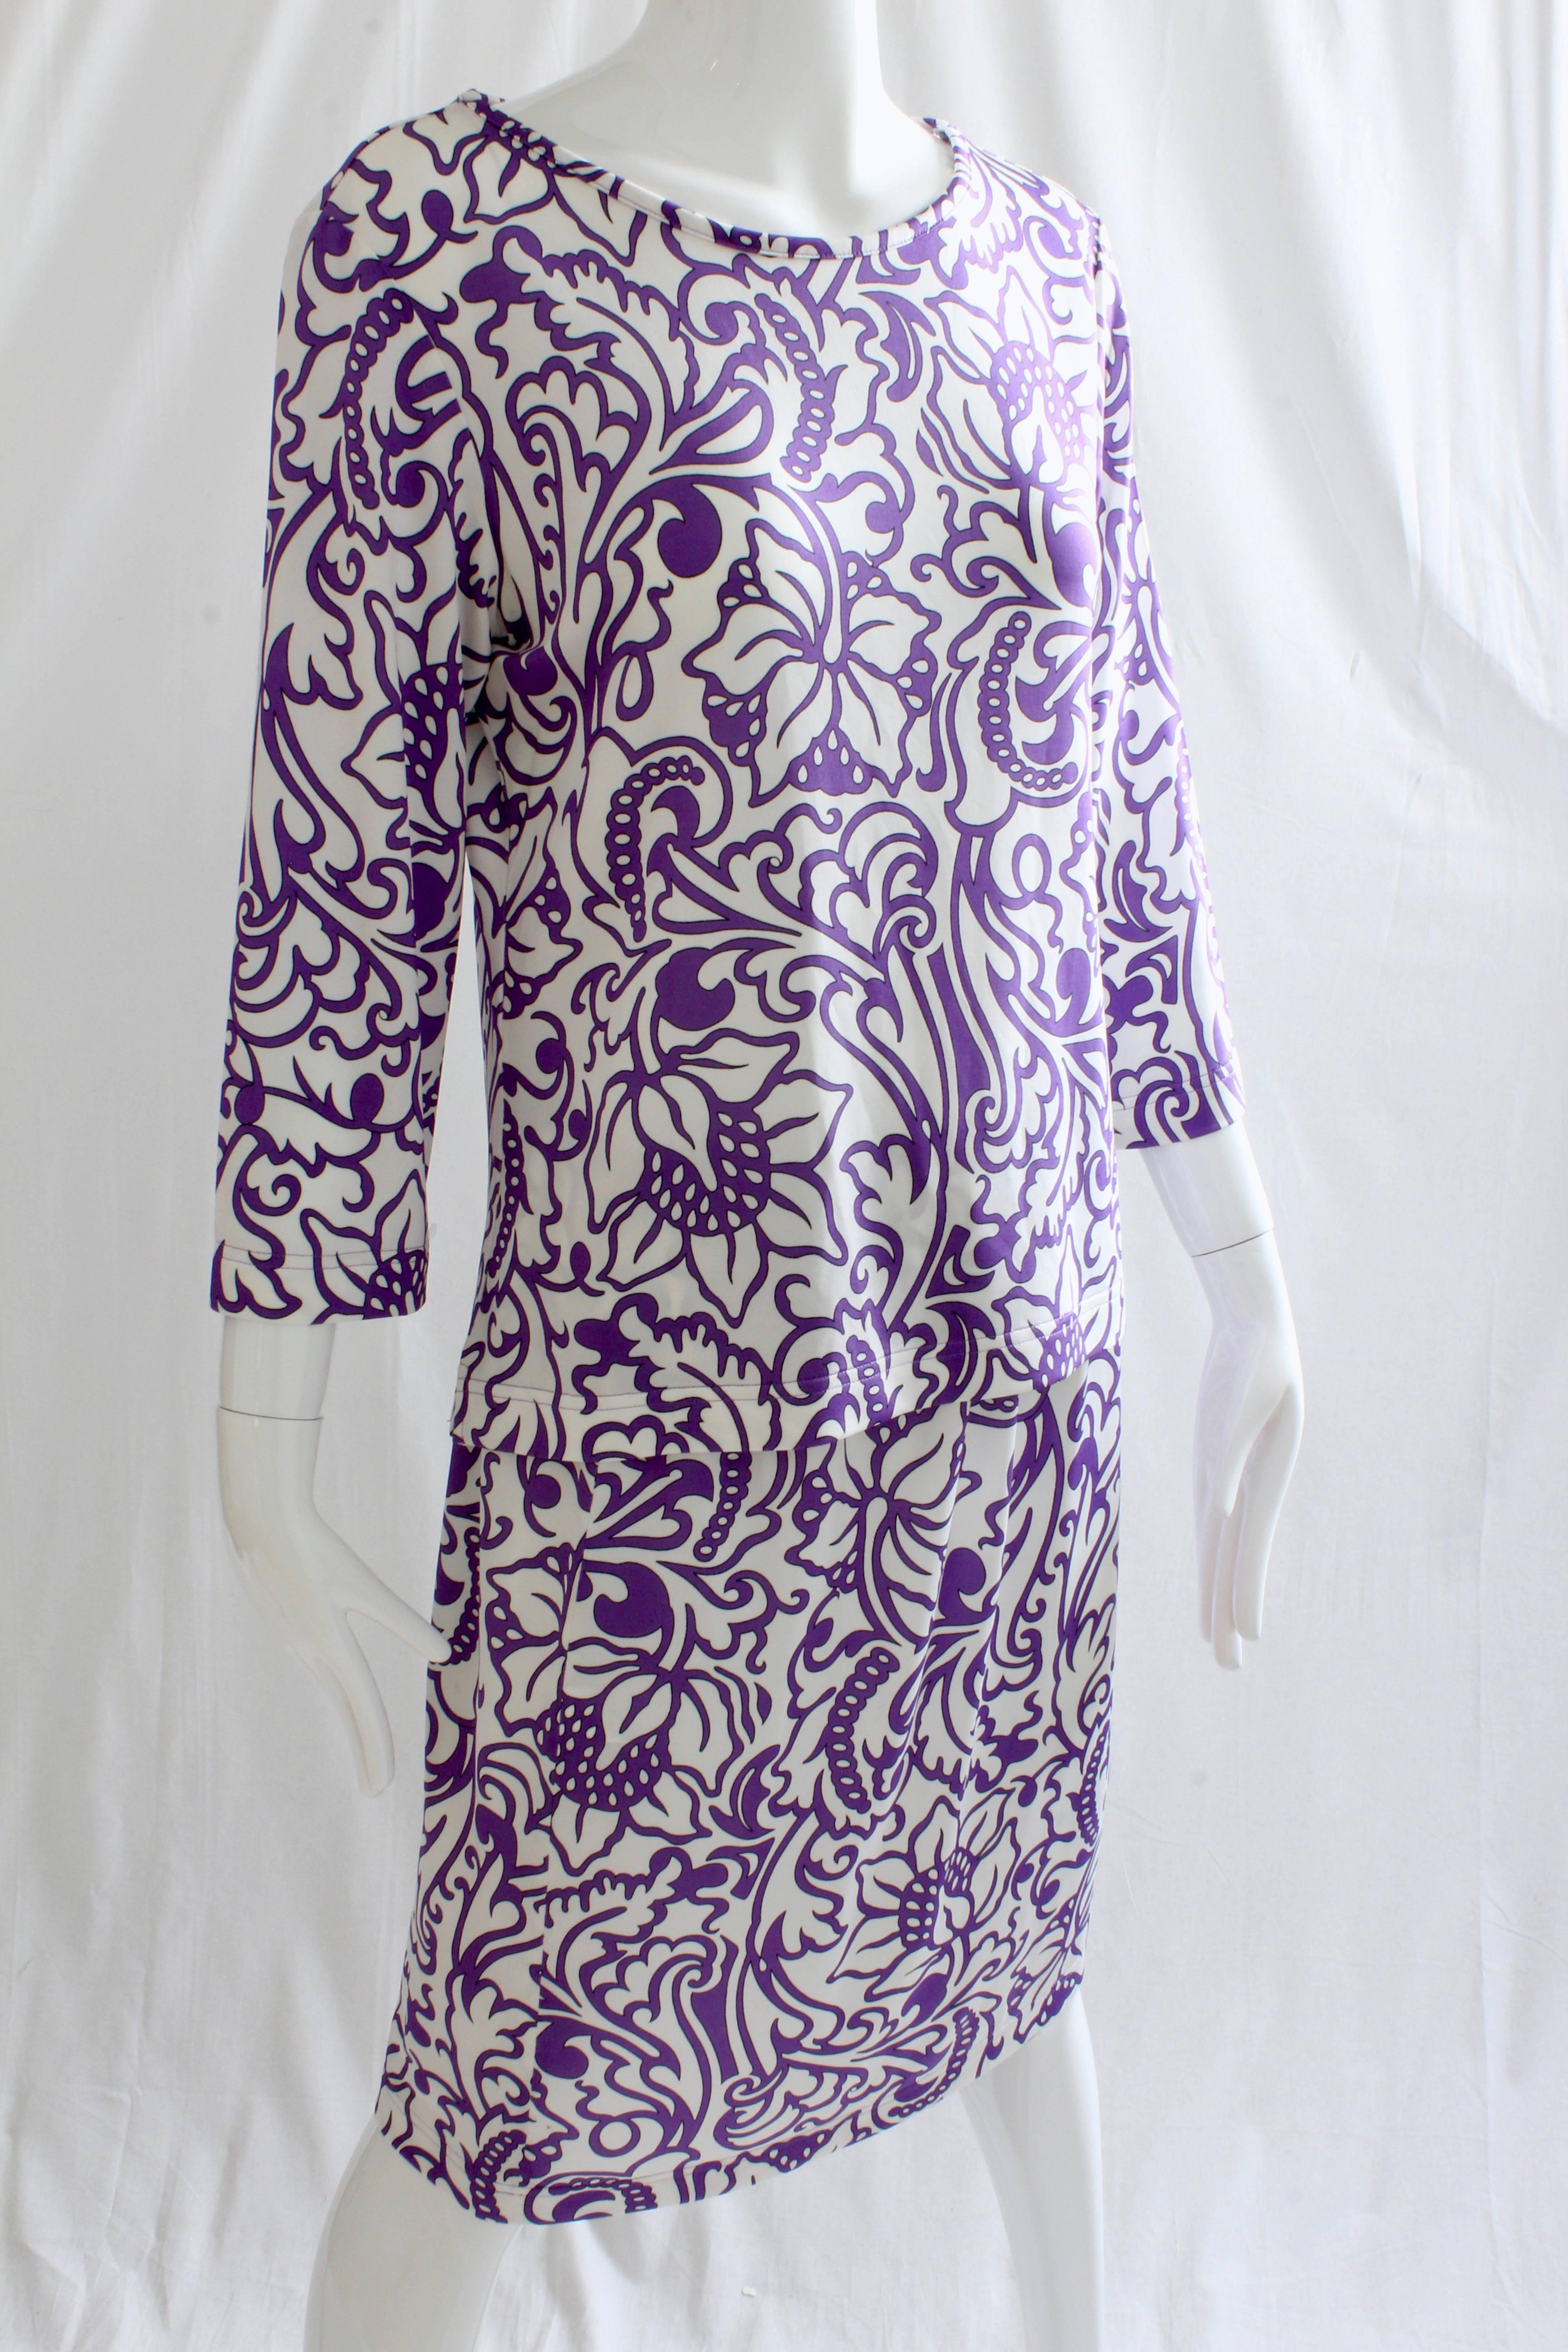 Averardo Bessi Blouse & Skirt Suit 2pc Purple White Floral Abstract Italy 12/10 2